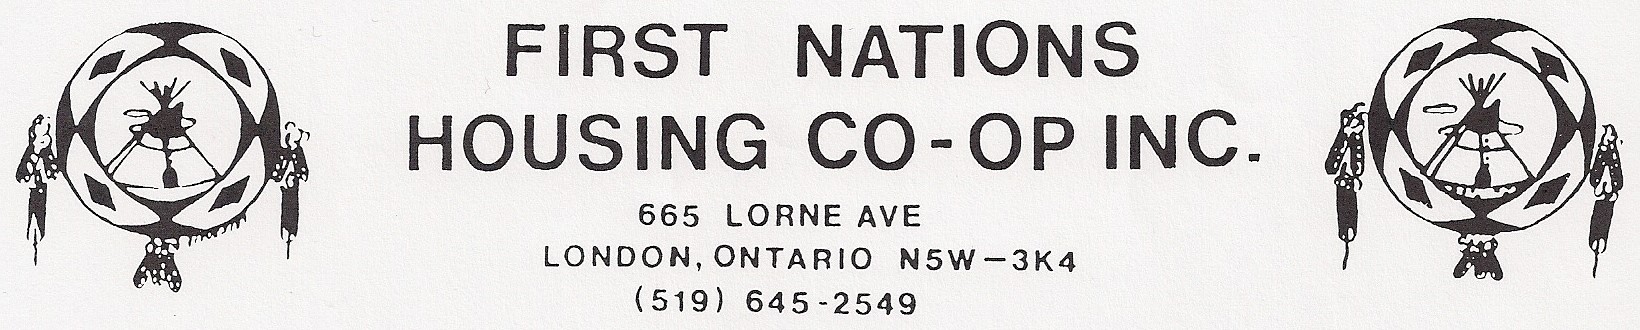 First Nations Housing Coop inc logo